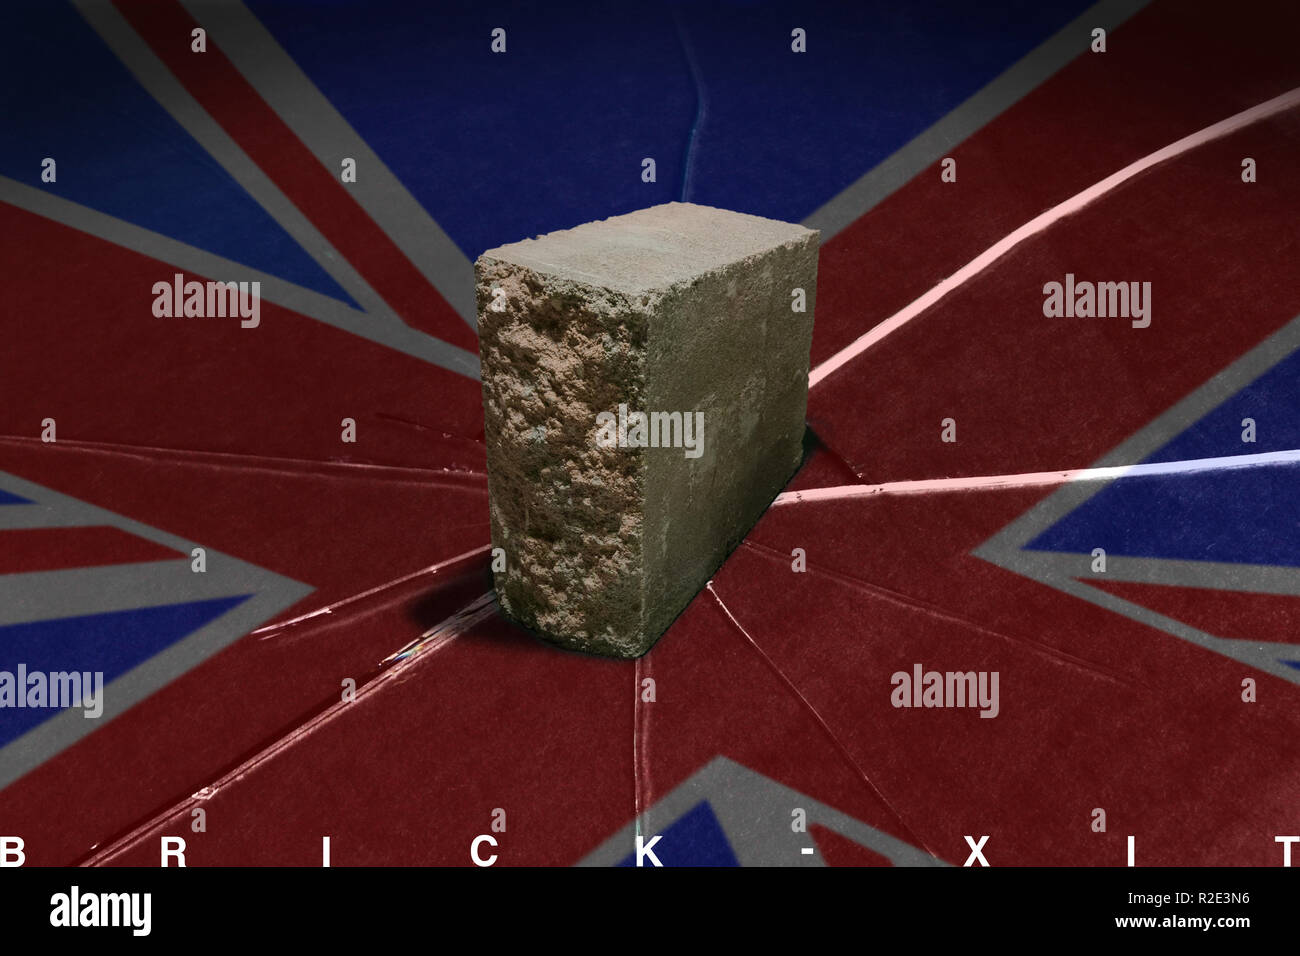 A big brick has to break the image of the British flag. I marked at the bottom of the image: BRICK-XIT Stock Photo